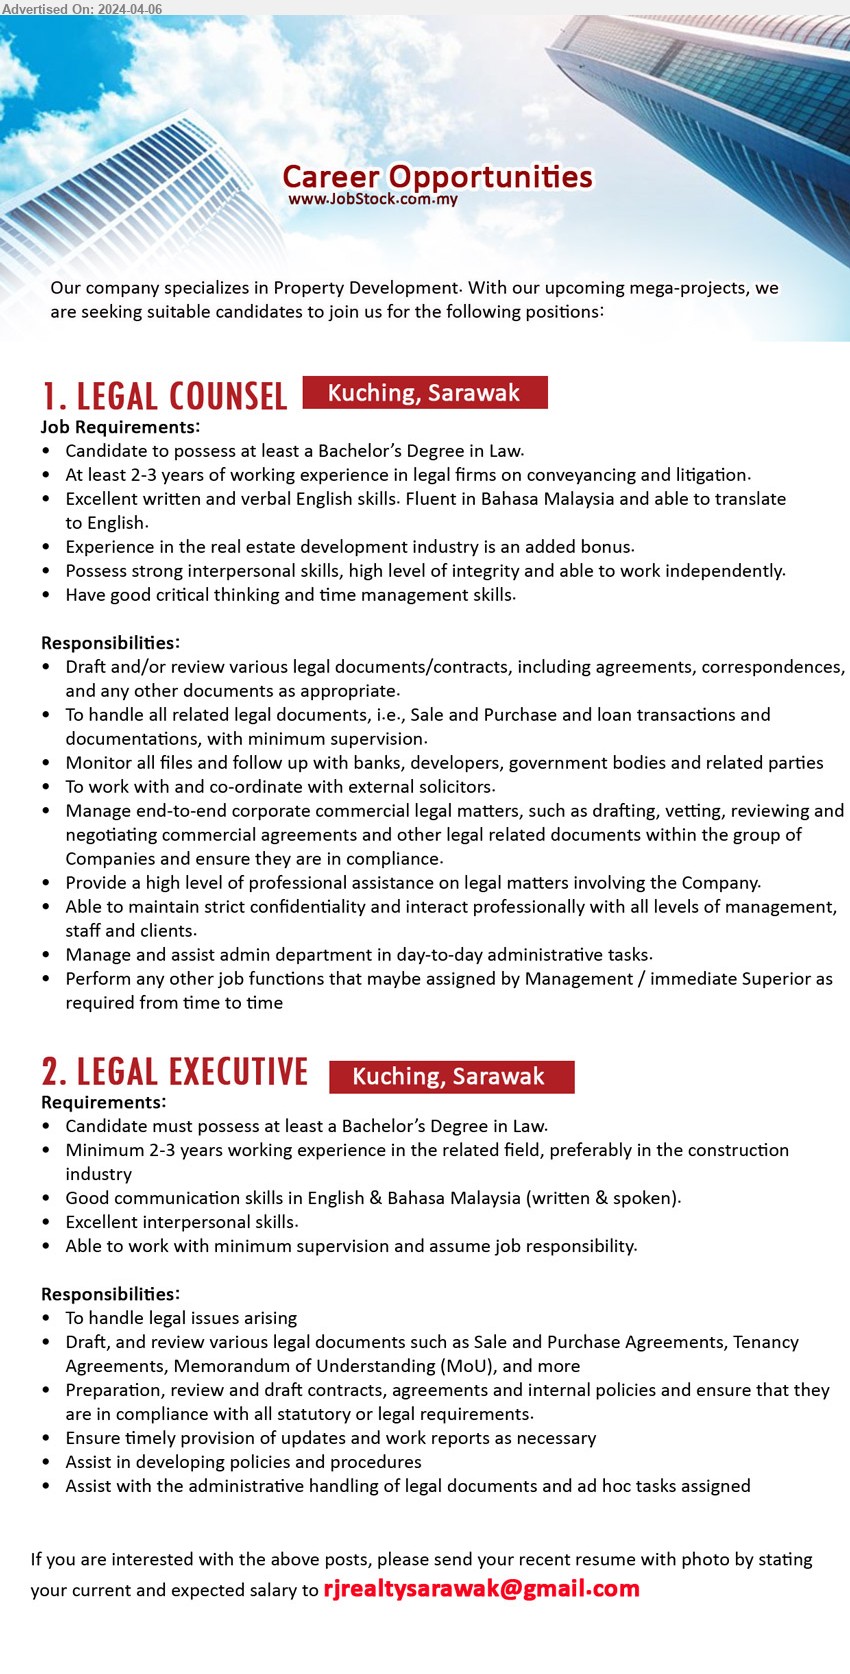 ADVERTISER (Property Development) - 1. LEGAL COUNSEL (Kuching), Bachelor Degree in Law, 2-3 years of working experience in legal firms on conveyancing and litigation,...
2. LEGAL EXECUTIVE  (Kuching), Bachelor’s Degree in Law, Minimum 2-3 years working experience in the related field, preferably in the construction,...
Email resume to ...